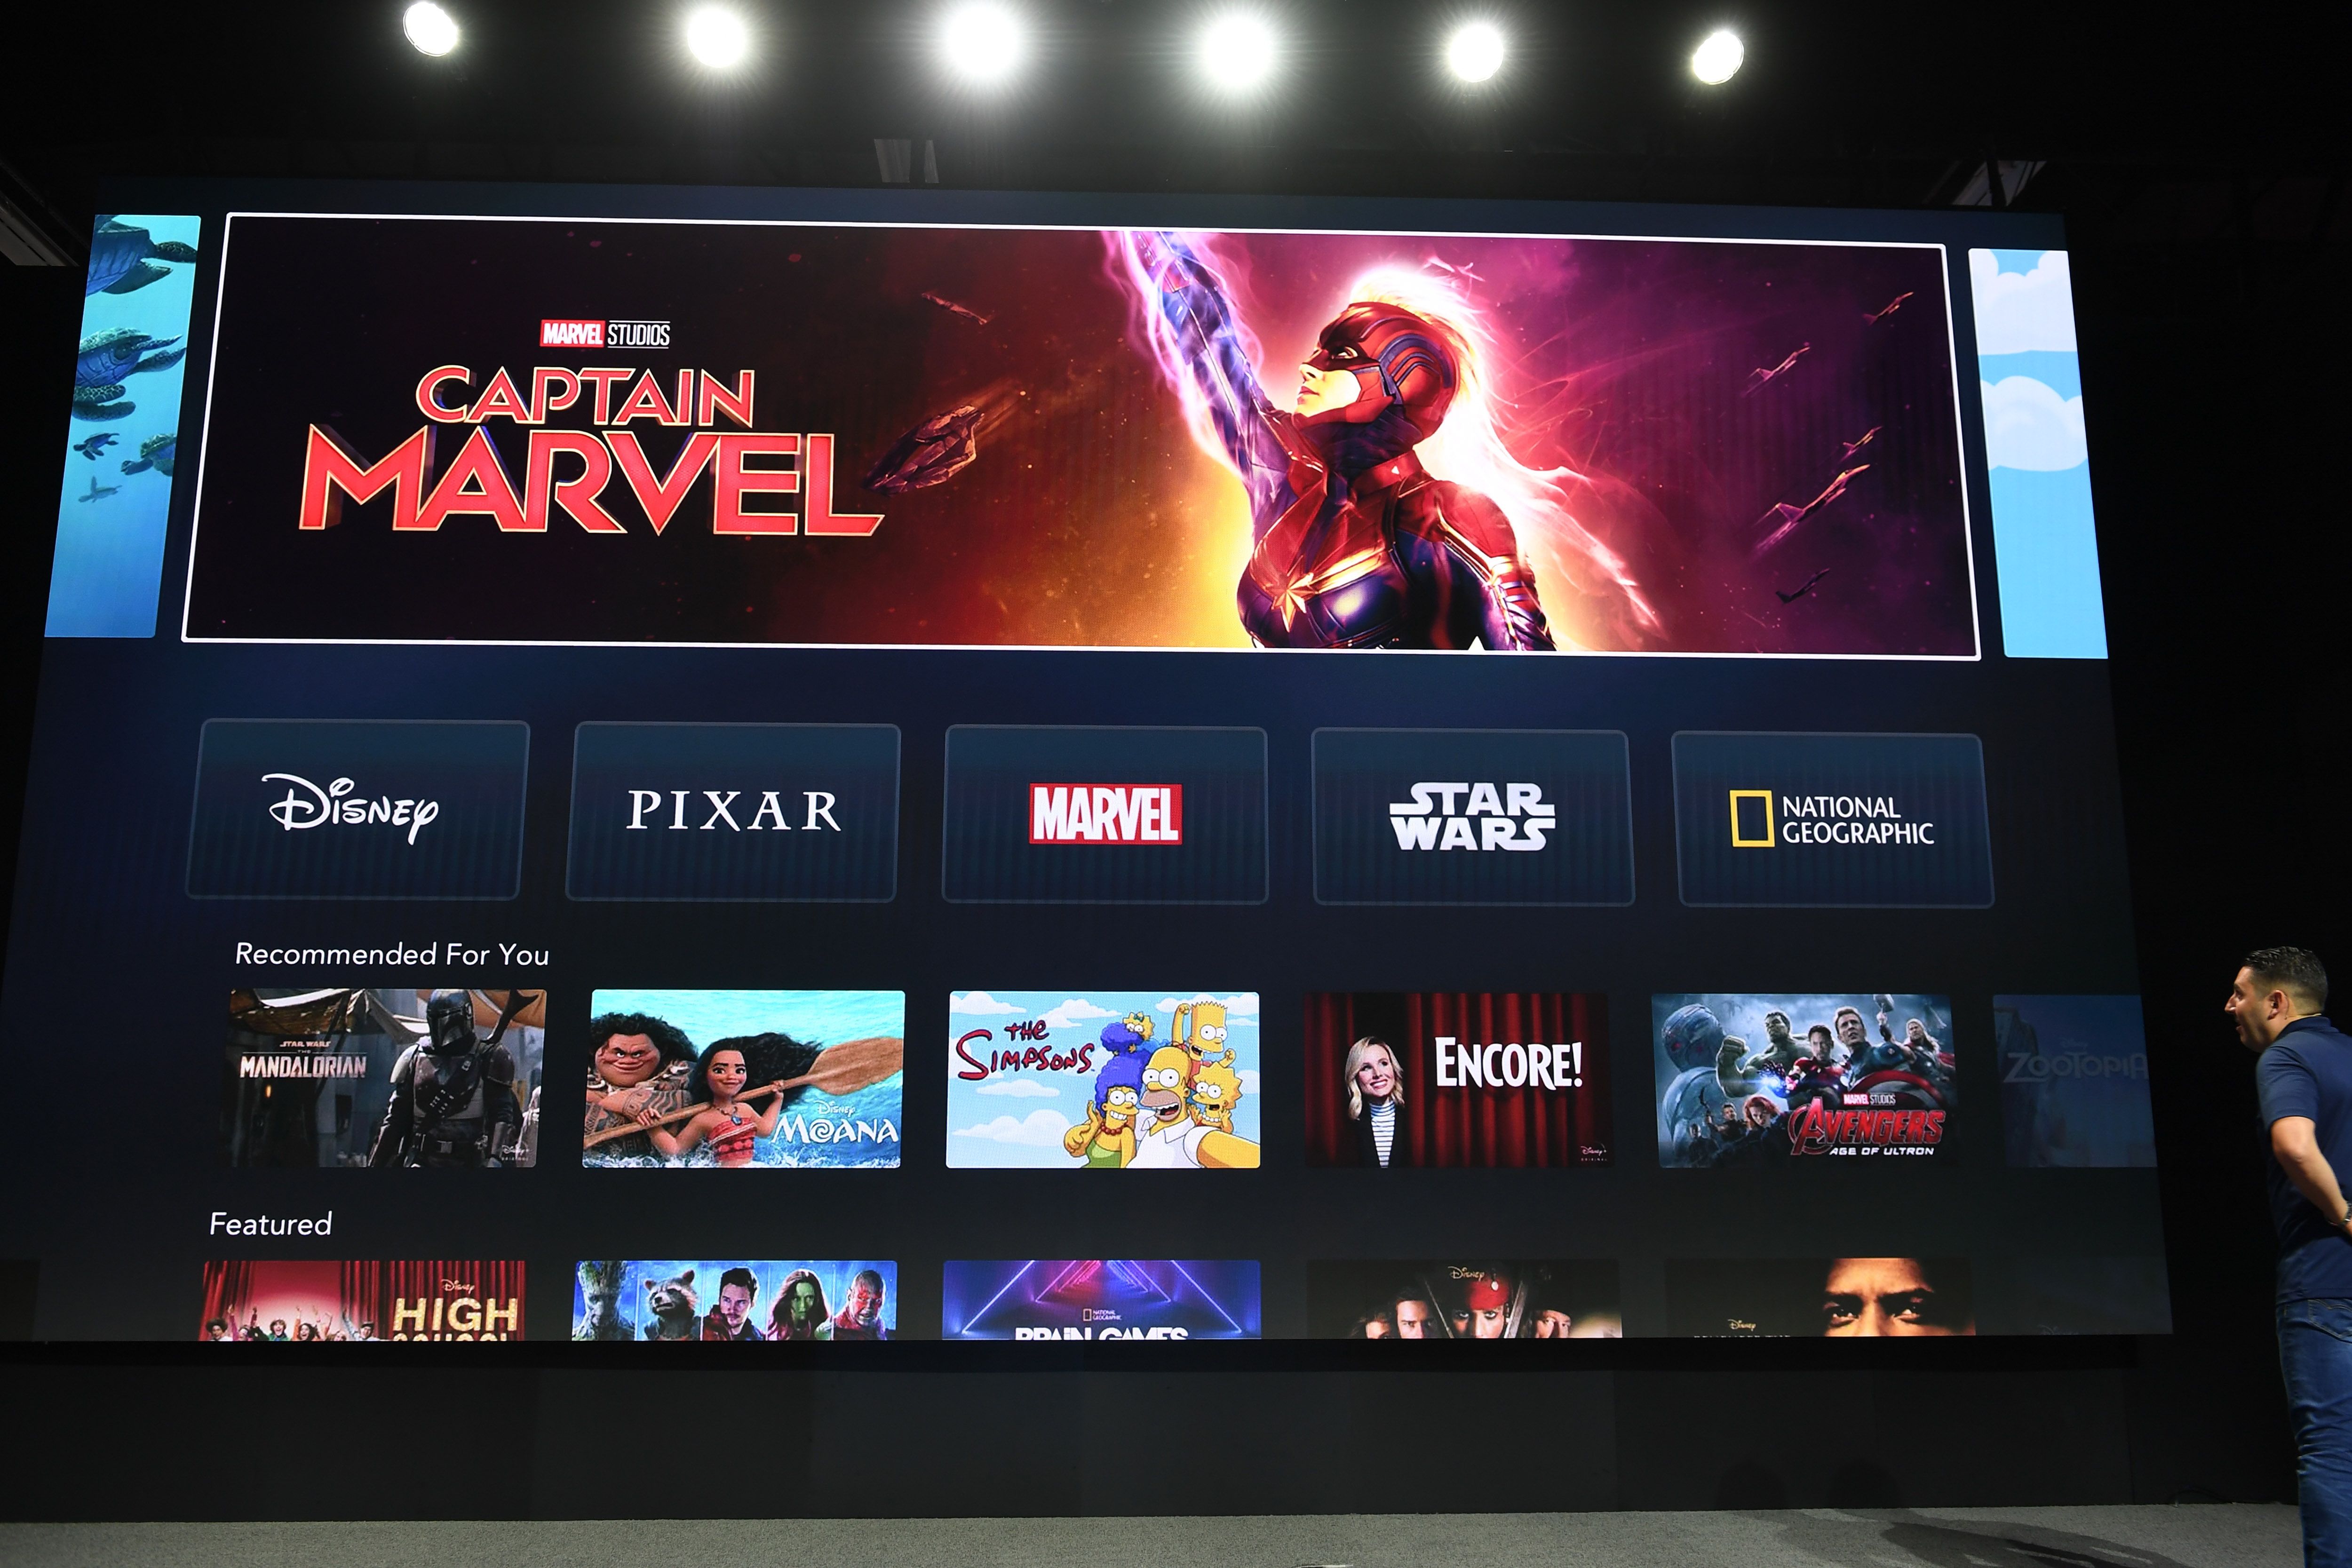 How to Get Disney Plus, HBO Max, and Apple TV Plus for Free